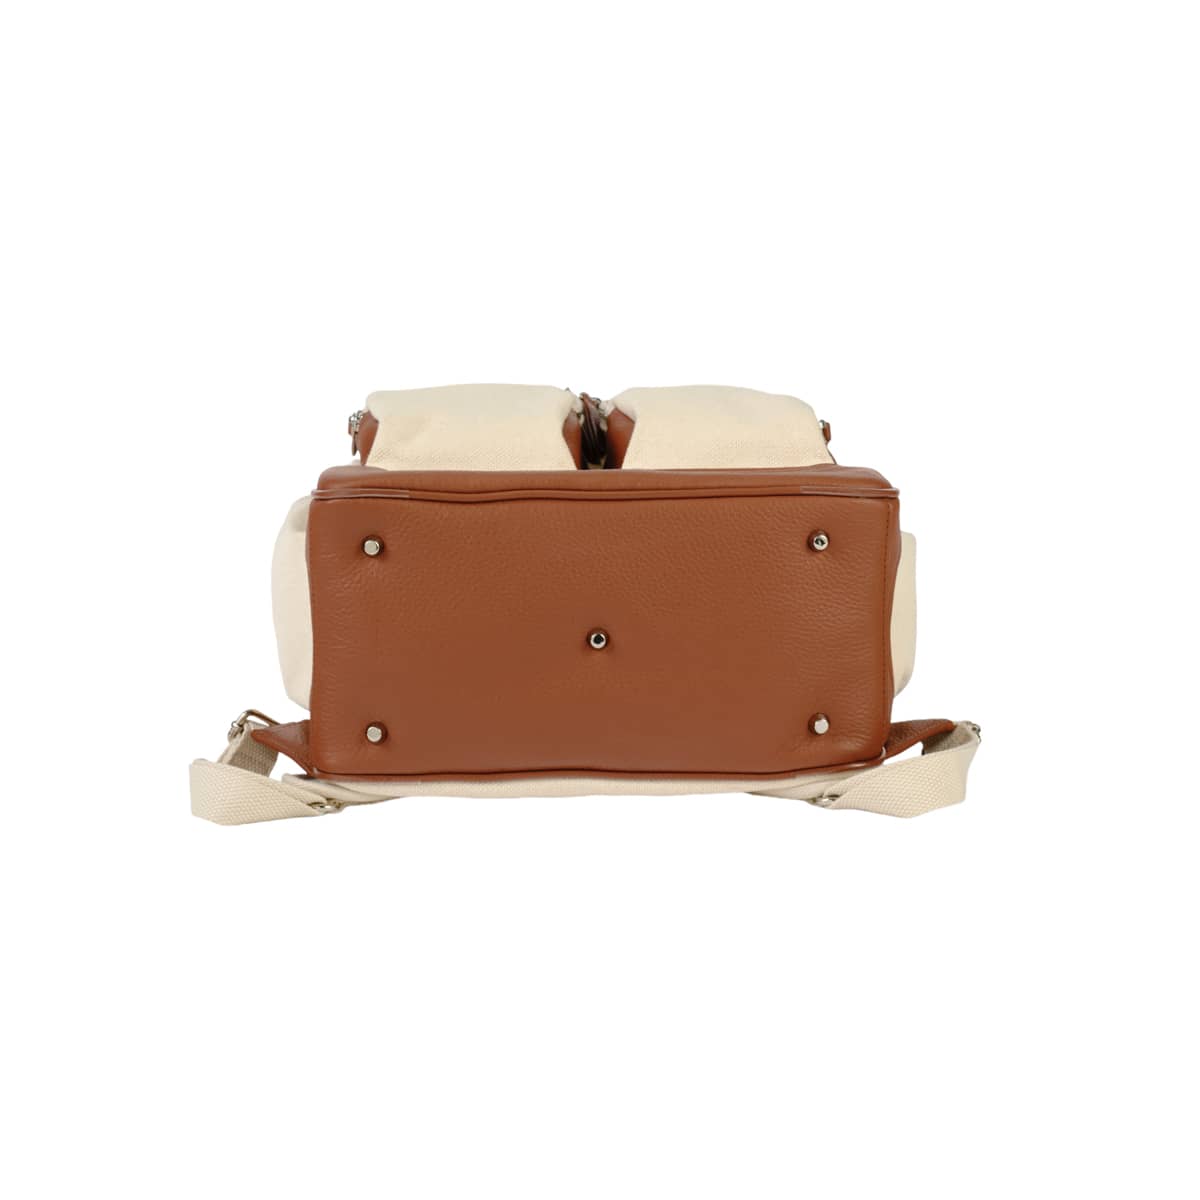 OiOi Canvas/Leather Nappy Backpack - Natural/Terracotta